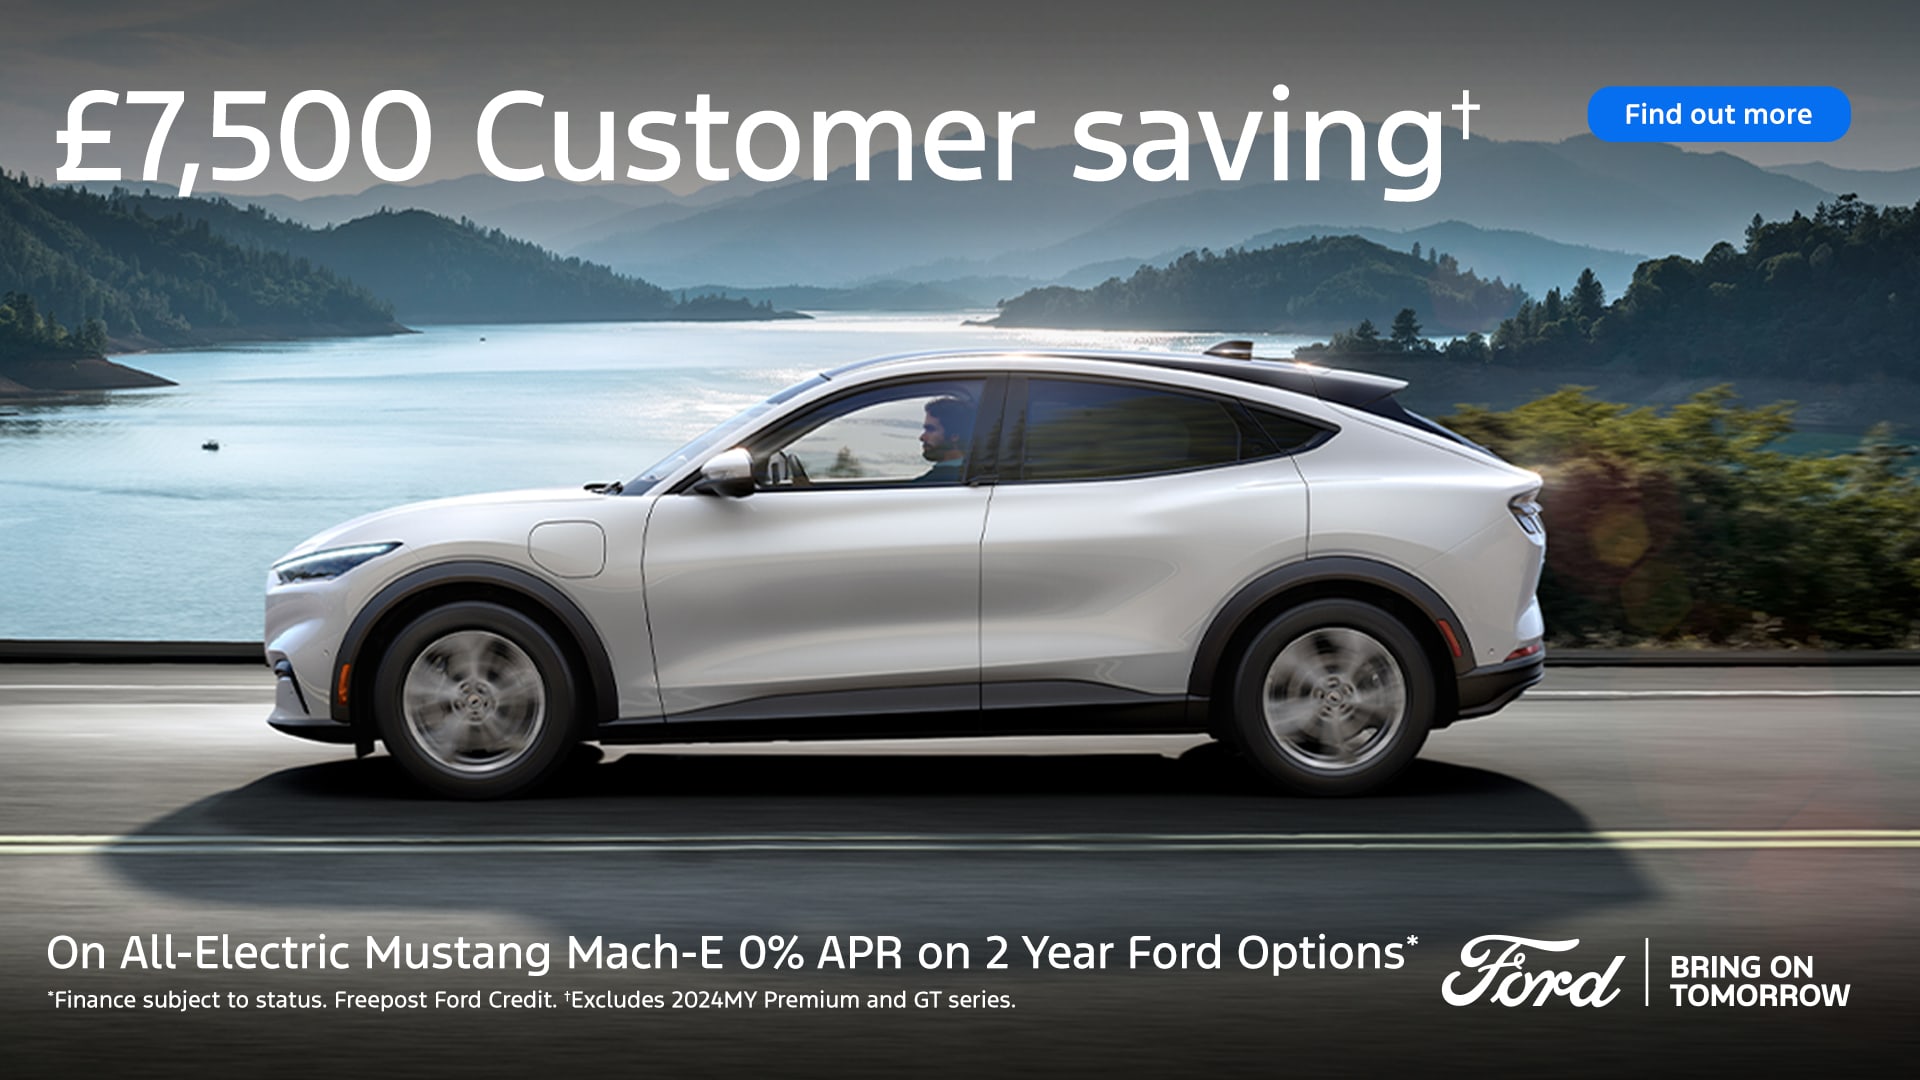 Mustang Mach-E - Latest Promotion